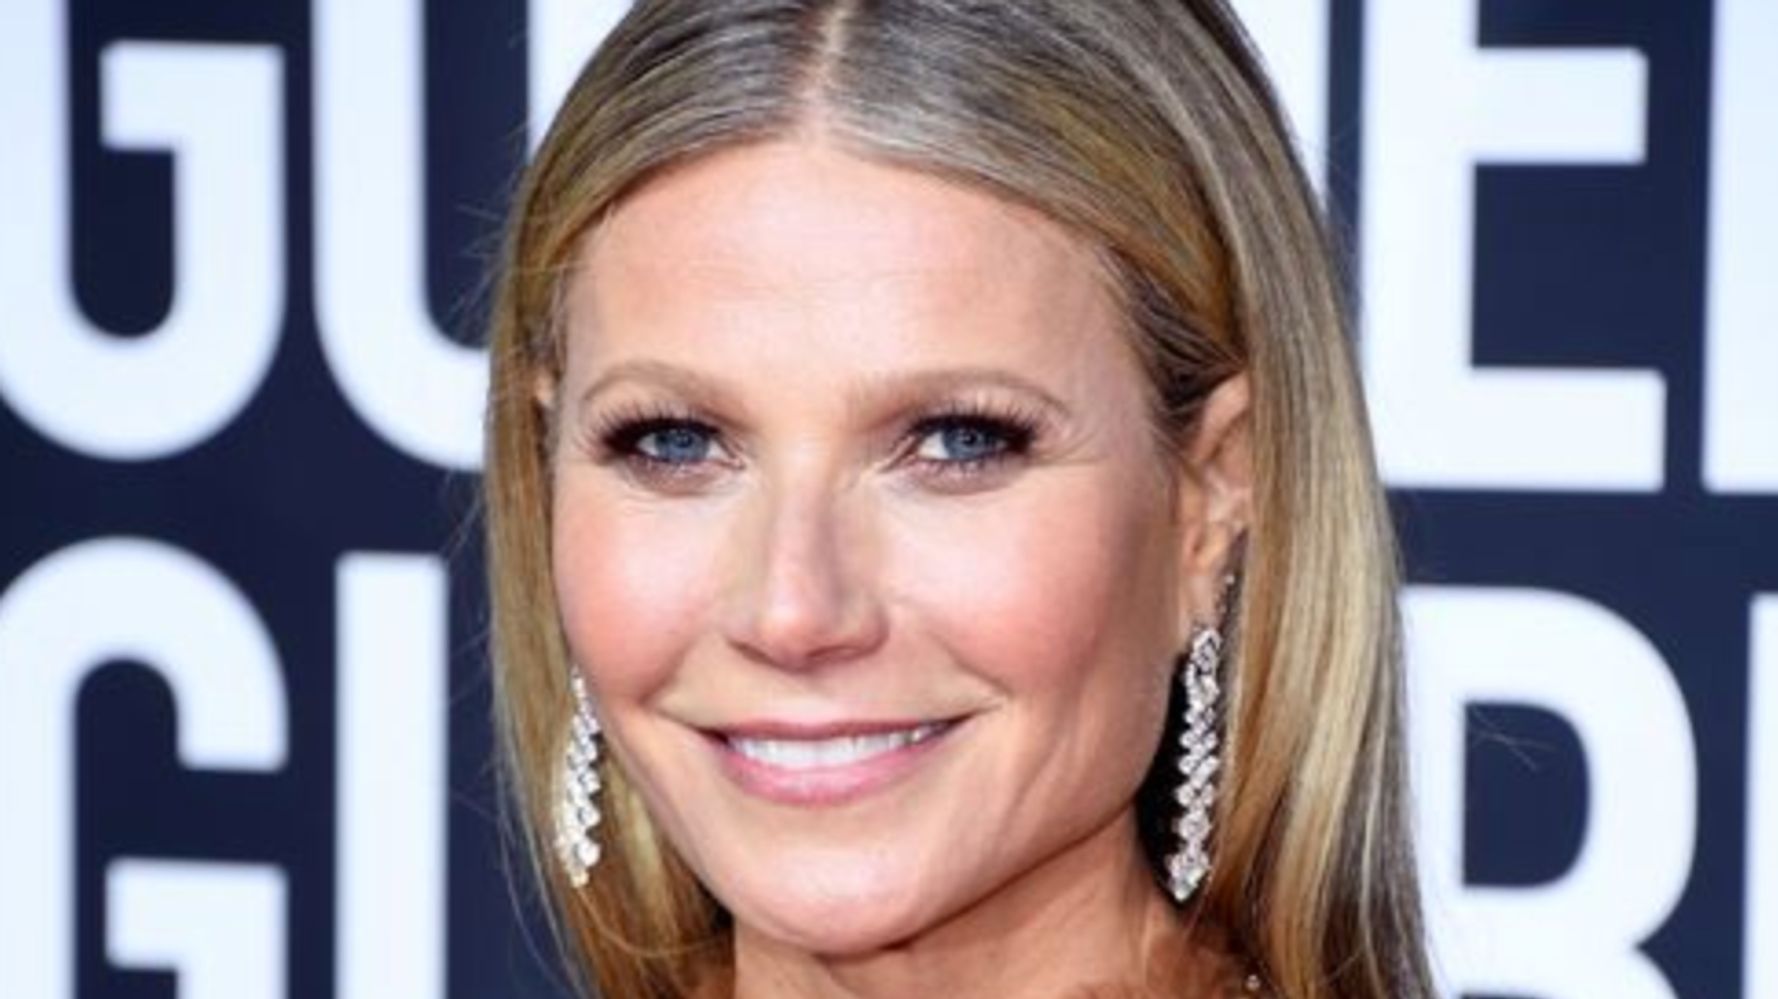 Gwyneth Paltrow reveals that she is a Long-Hauler COVID-19 with “cure” yet to be done